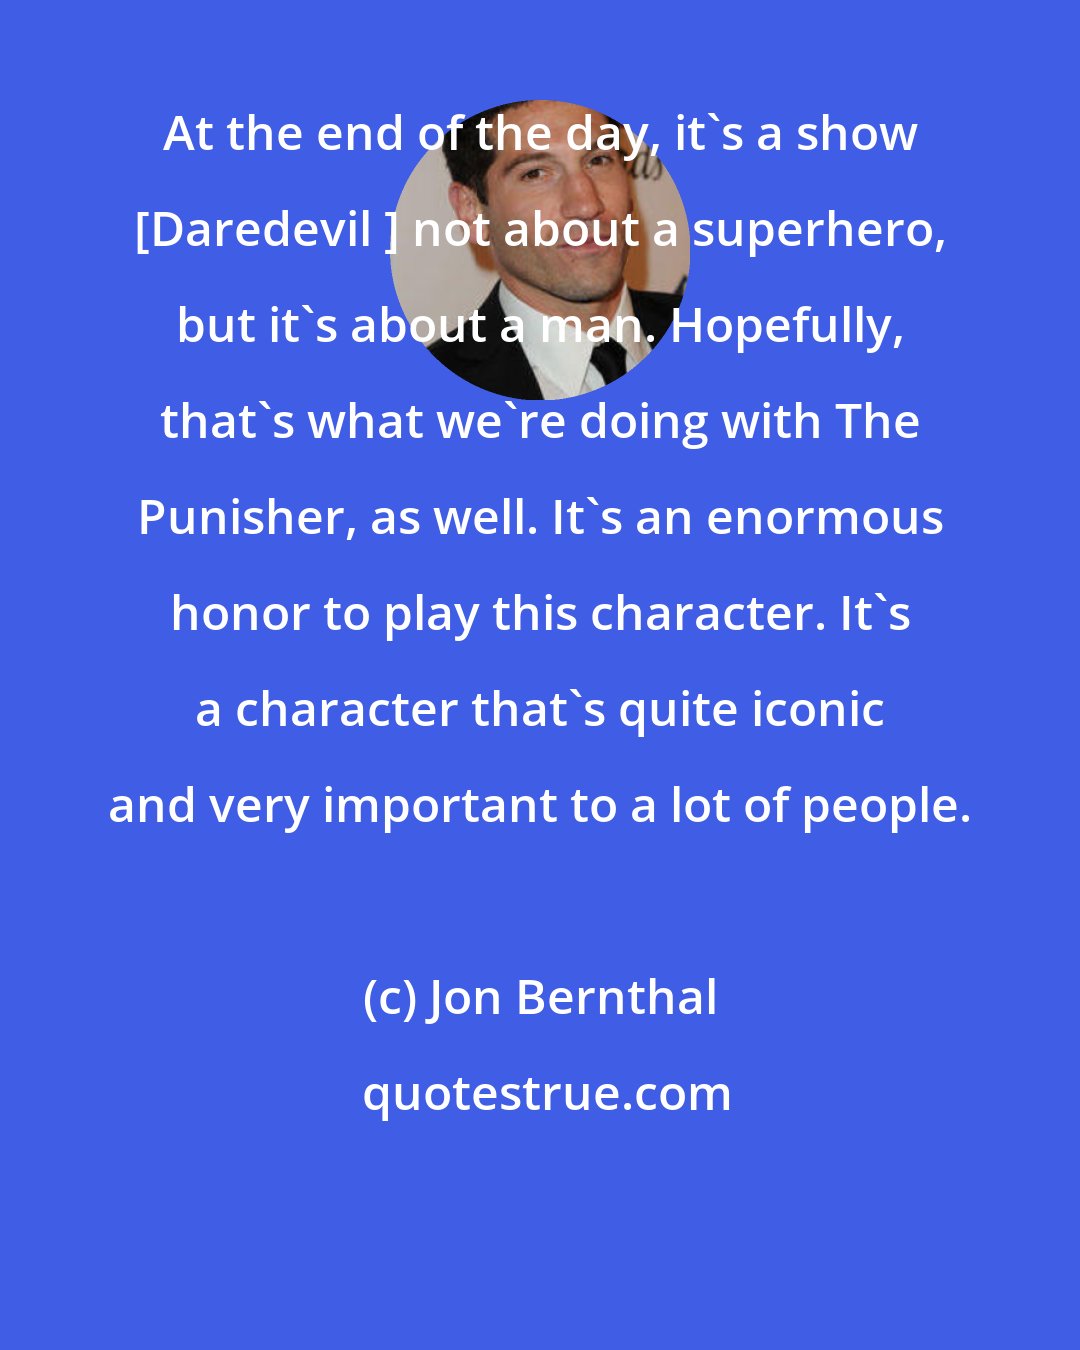 Jon Bernthal: At the end of the day, it's a show [Daredevil ] not about a superhero, but it's about a man. Hopefully, that's what we're doing with The Punisher, as well. It's an enormous honor to play this character. It's a character that's quite iconic and very important to a lot of people.